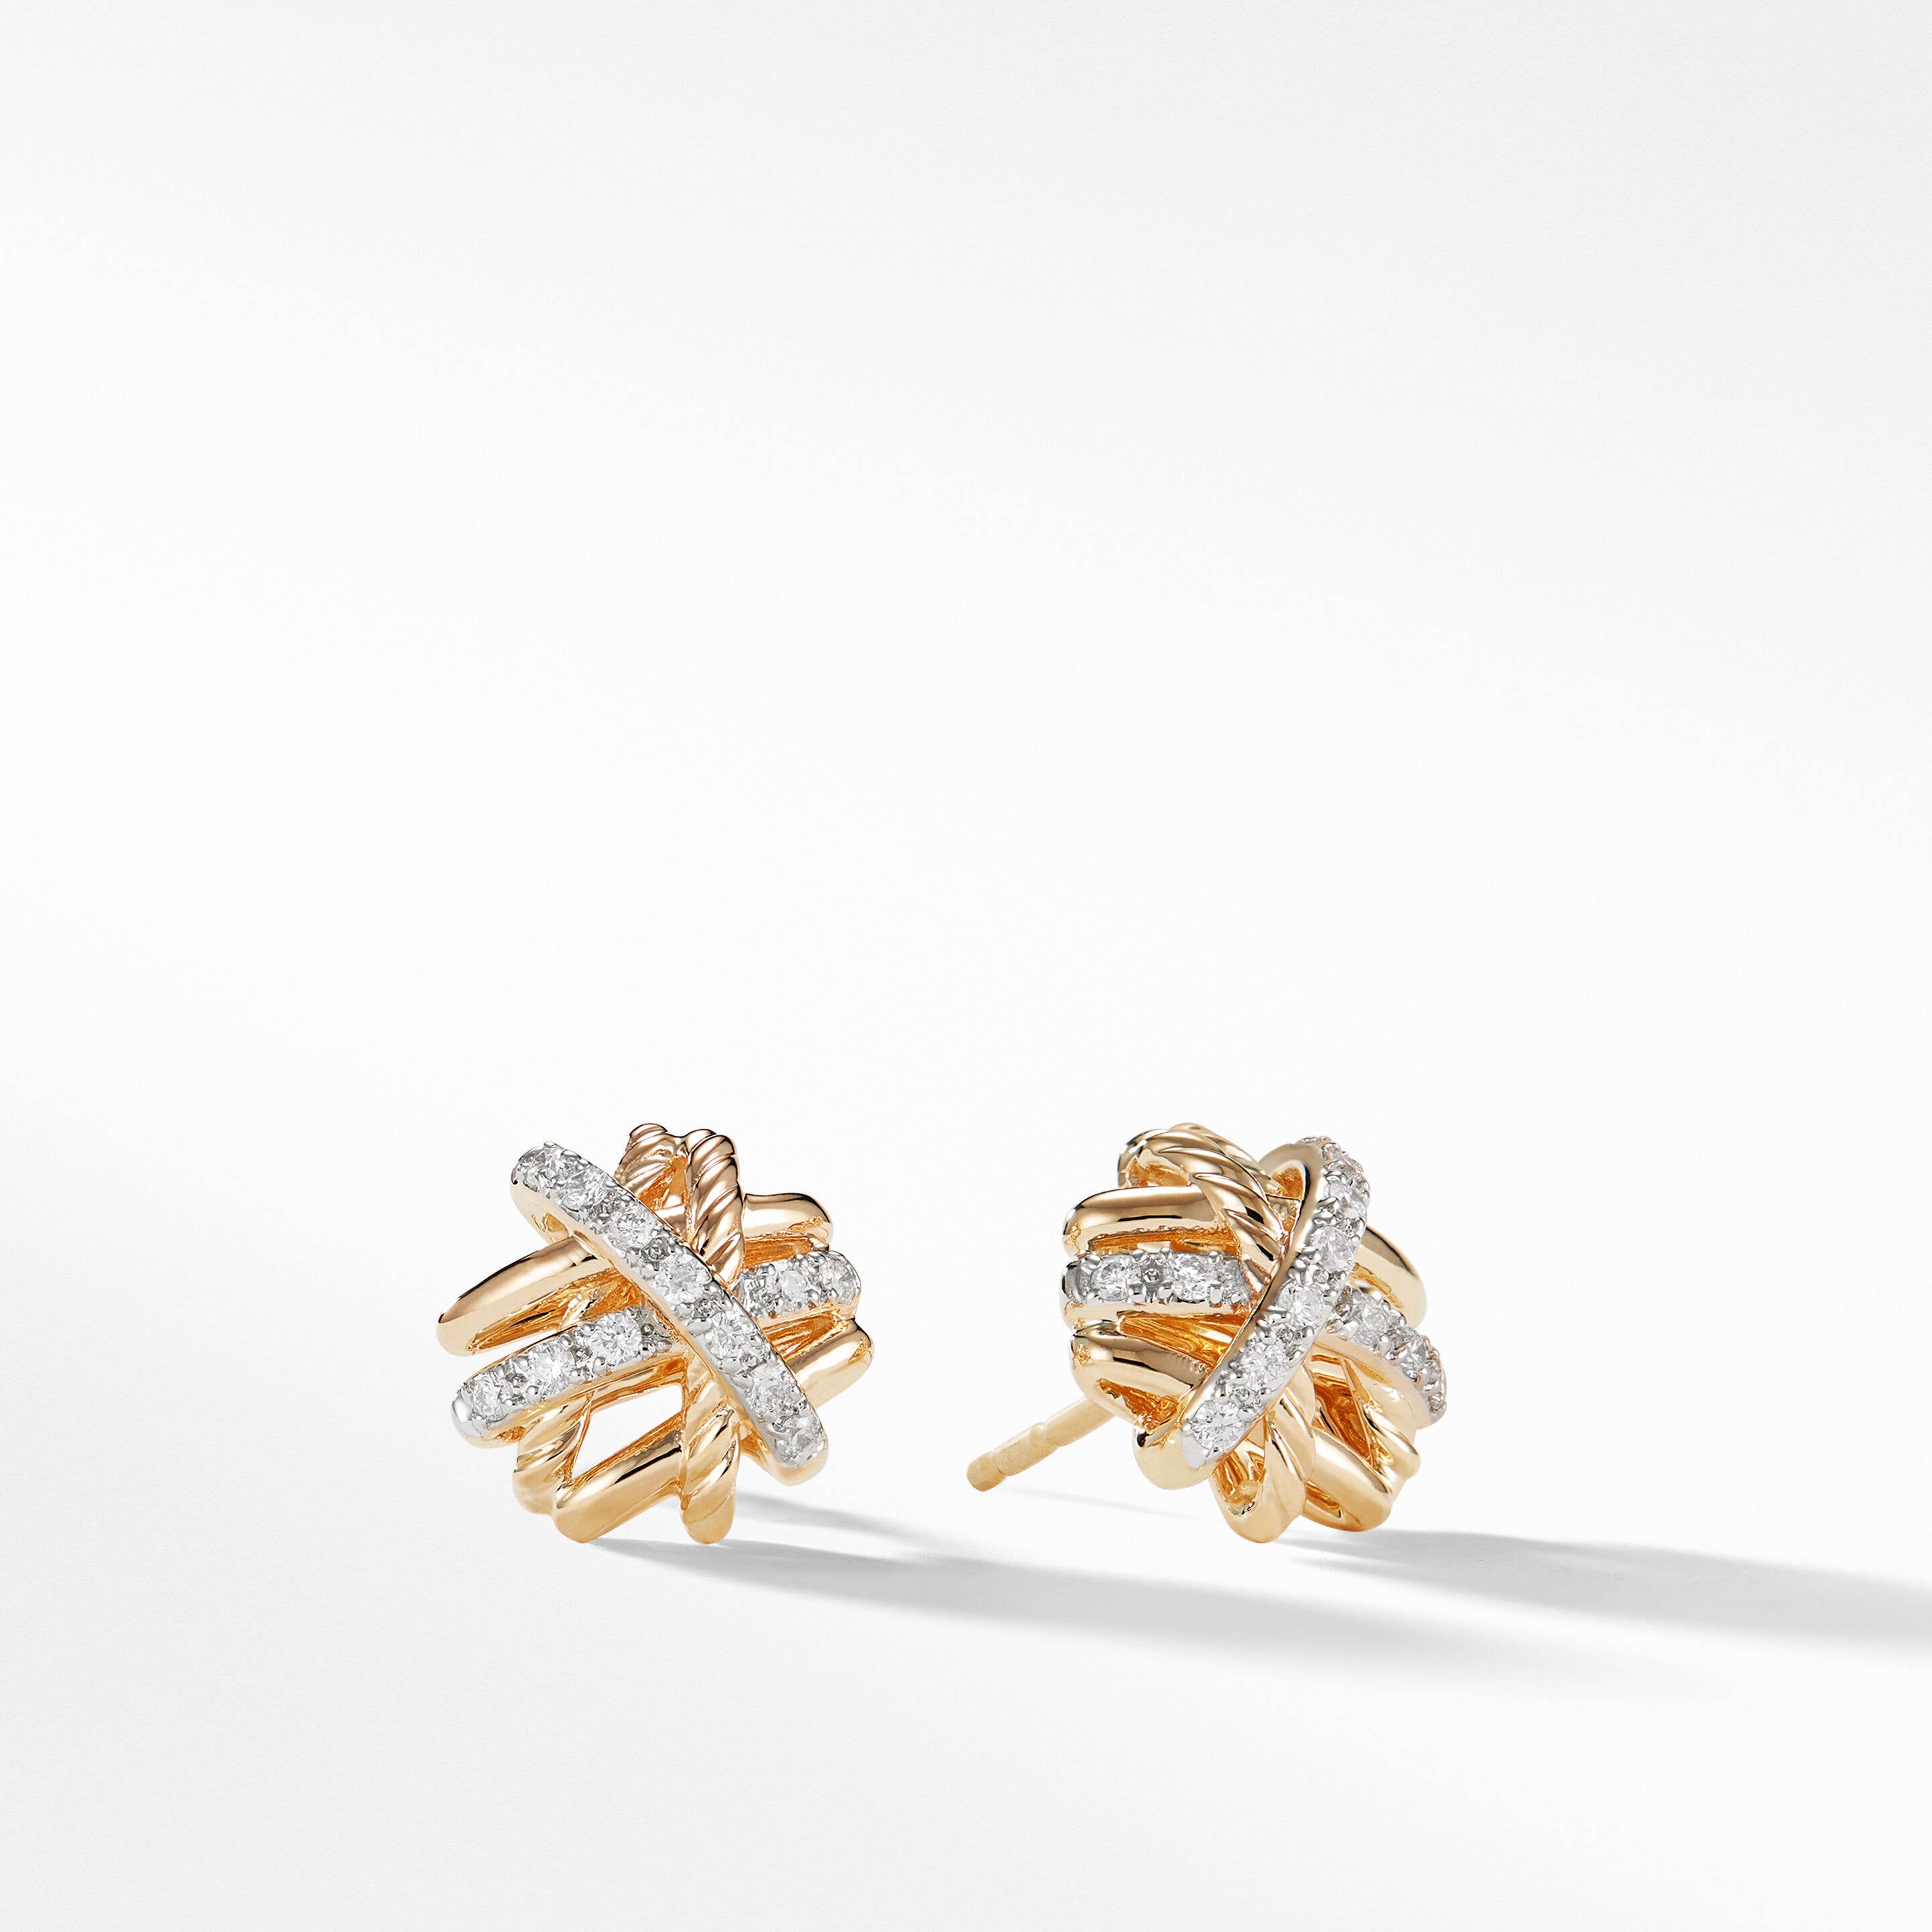 Crossover Stud Earrings in 18K Yellow Gold with Pavé Diamonds